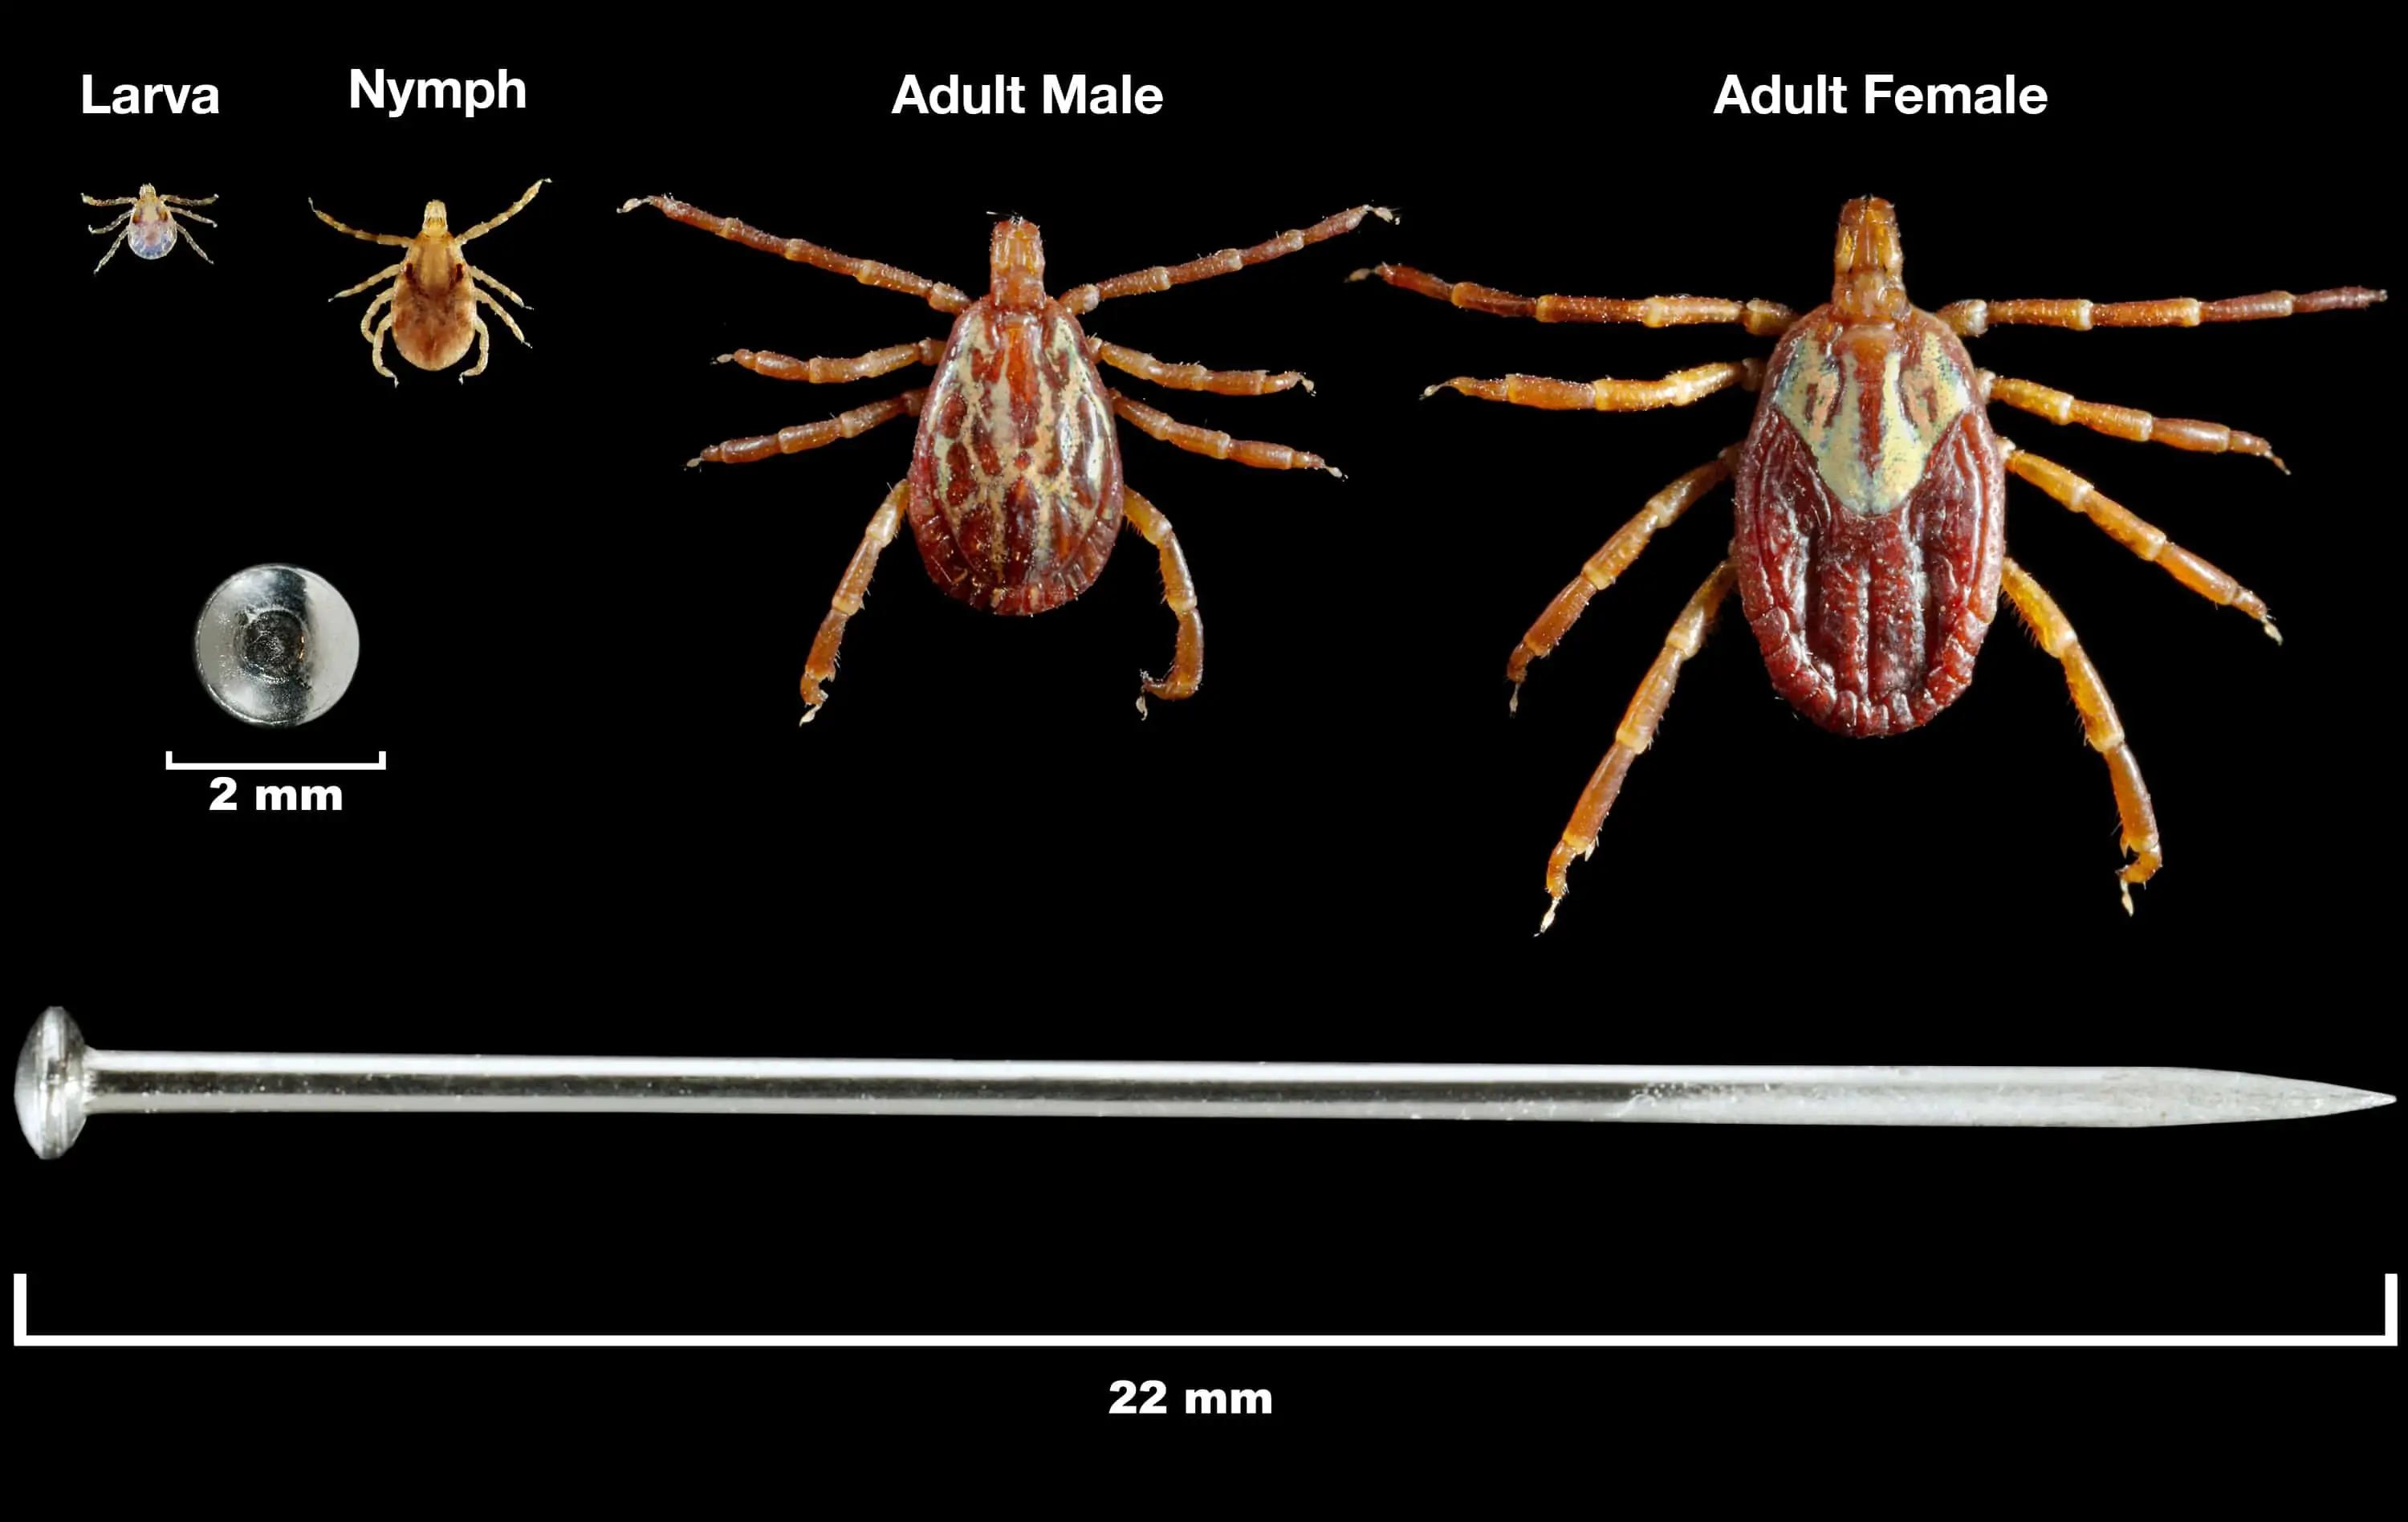 Tick Lifecycle &amp; Size of Adult Ticks Against Nail